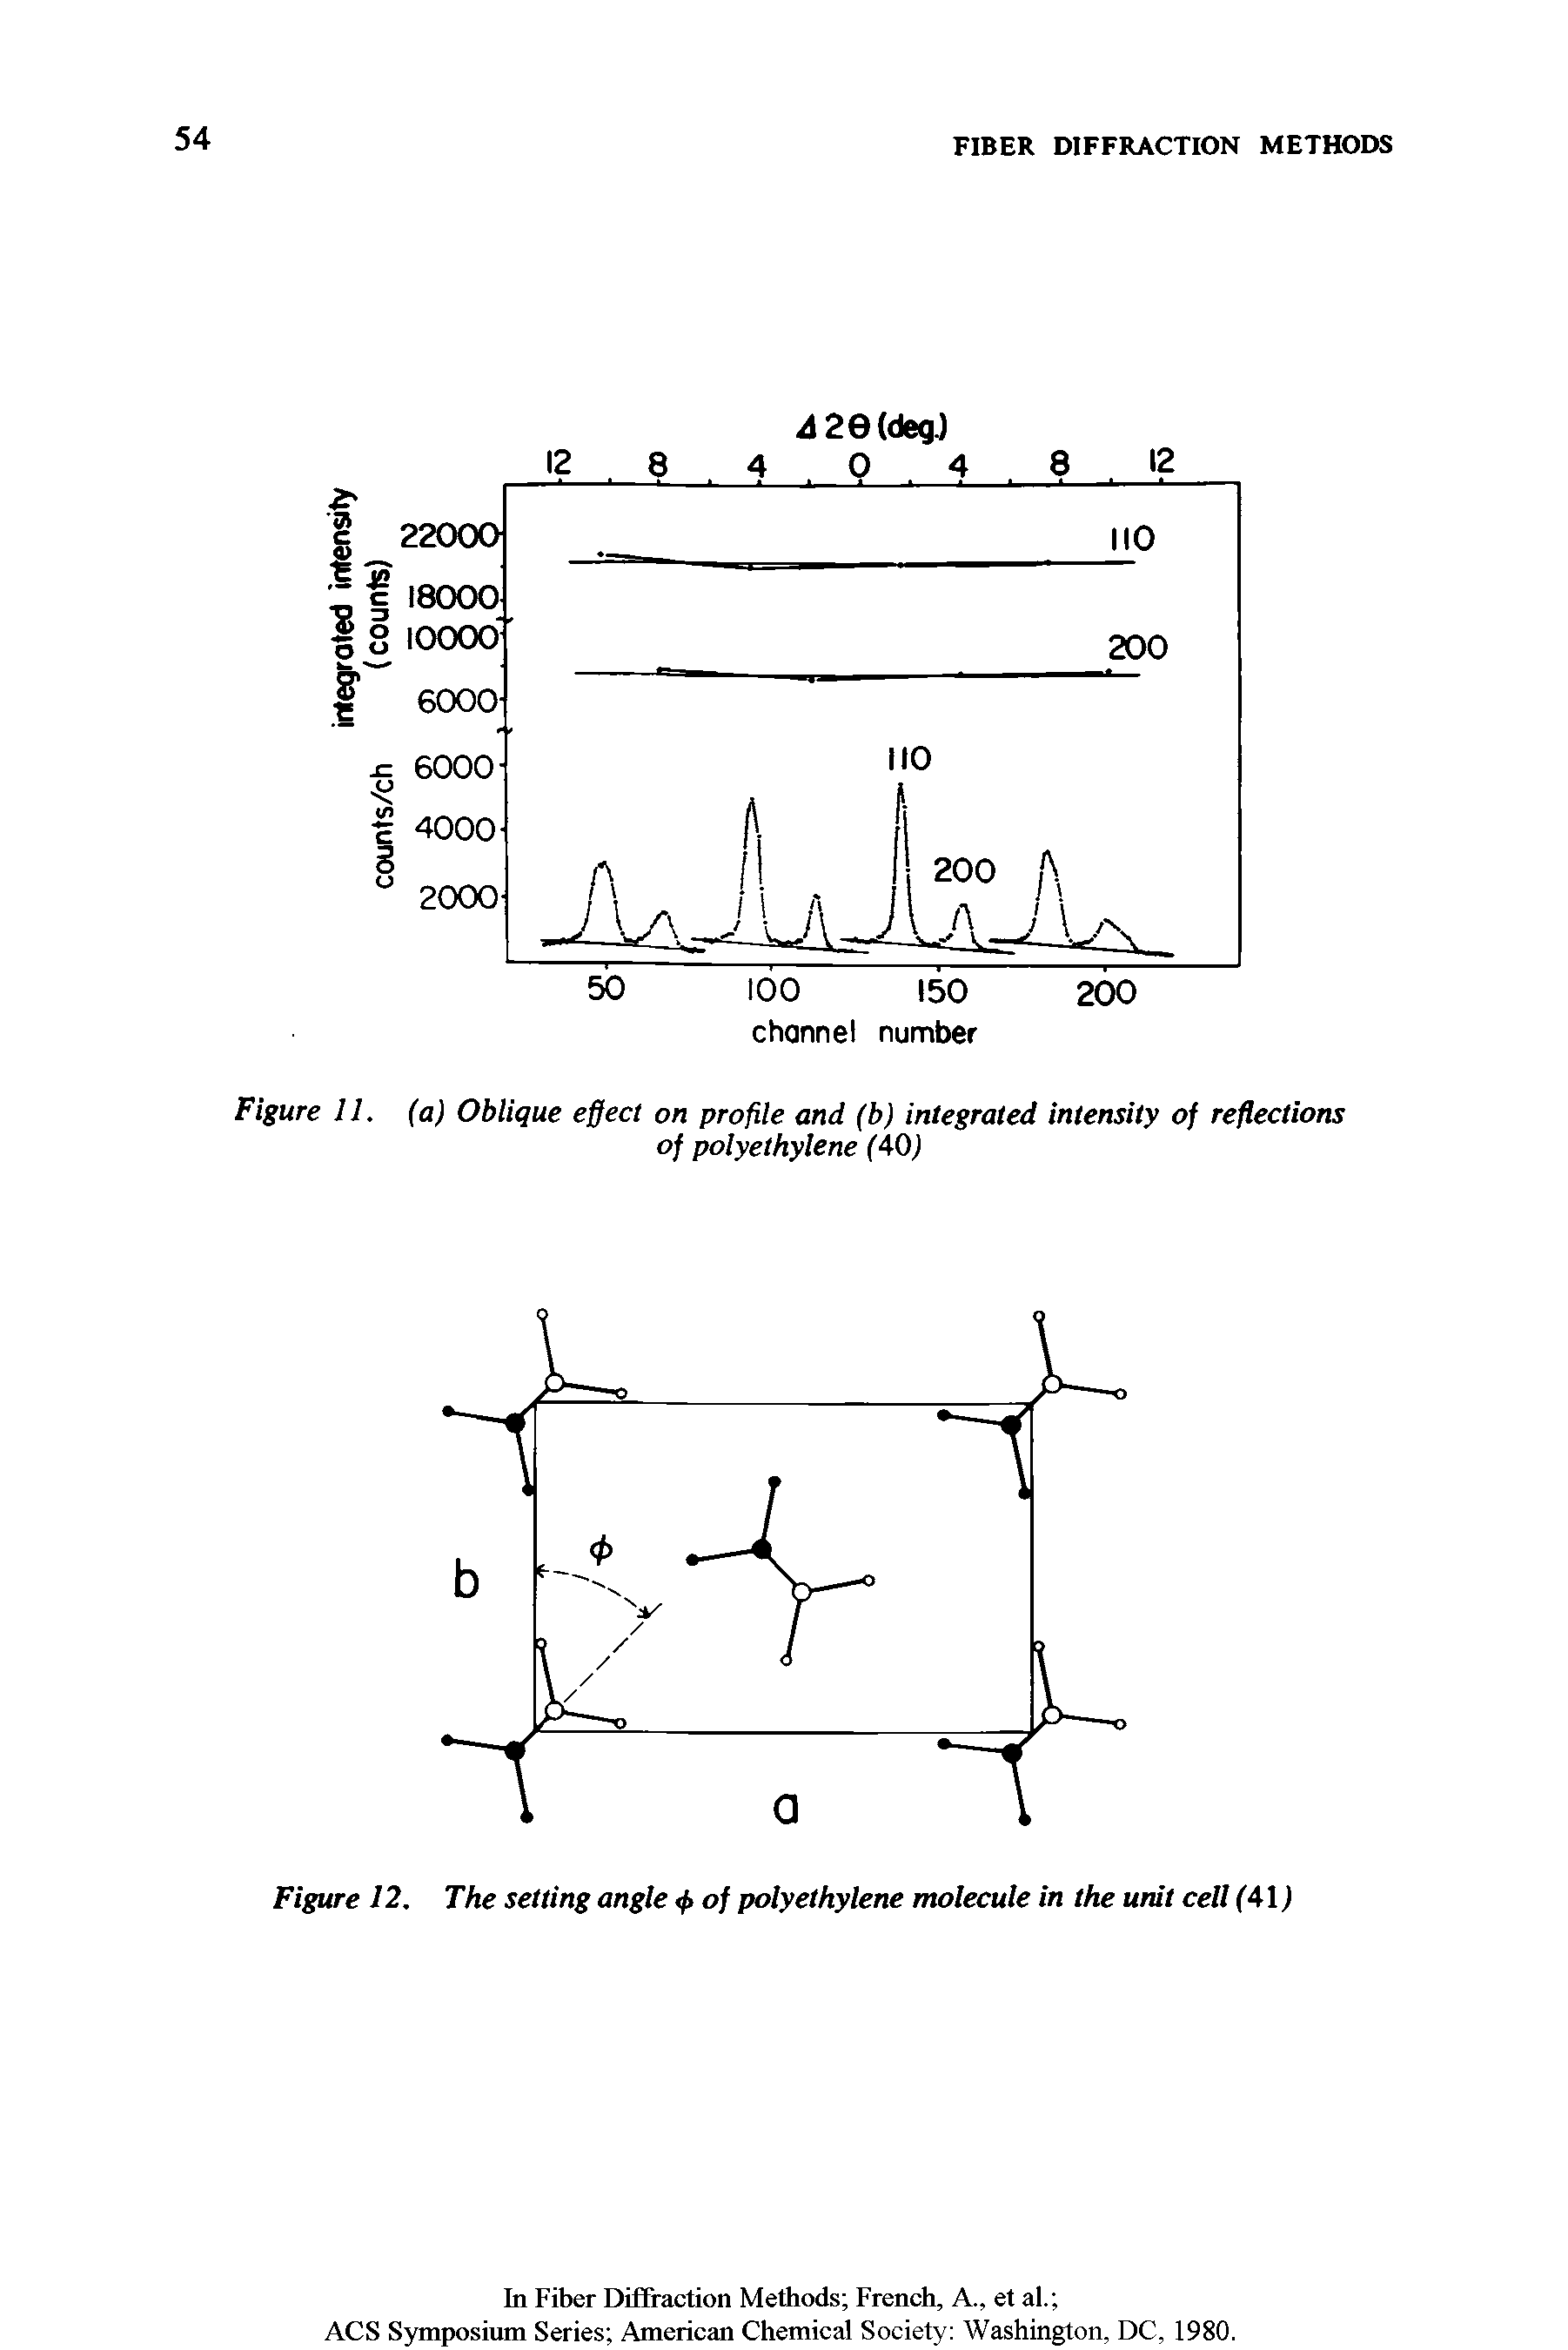 Figure 12. The setting angle <f> of polyethylene molecule in the unit cell (41)...